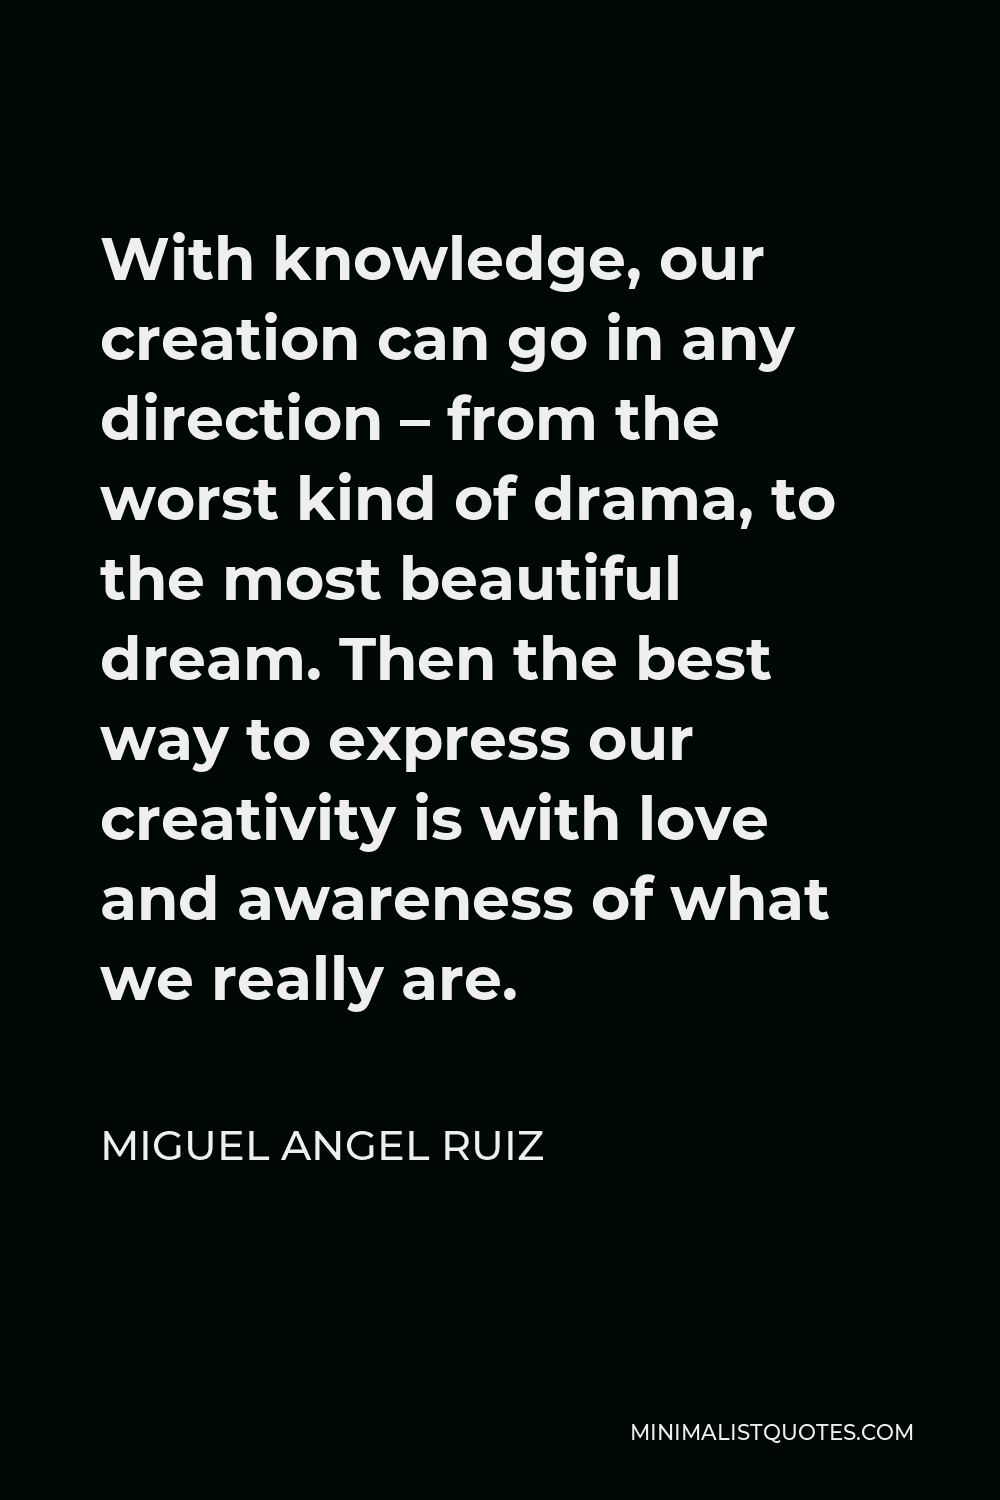 Miguel Angel Ruiz Quote - With knowledge, our creation can go in any direction – from the worst kind of drama, to the most beautiful dream. Then the best way to express our creativity is with love and awareness of what we really are.